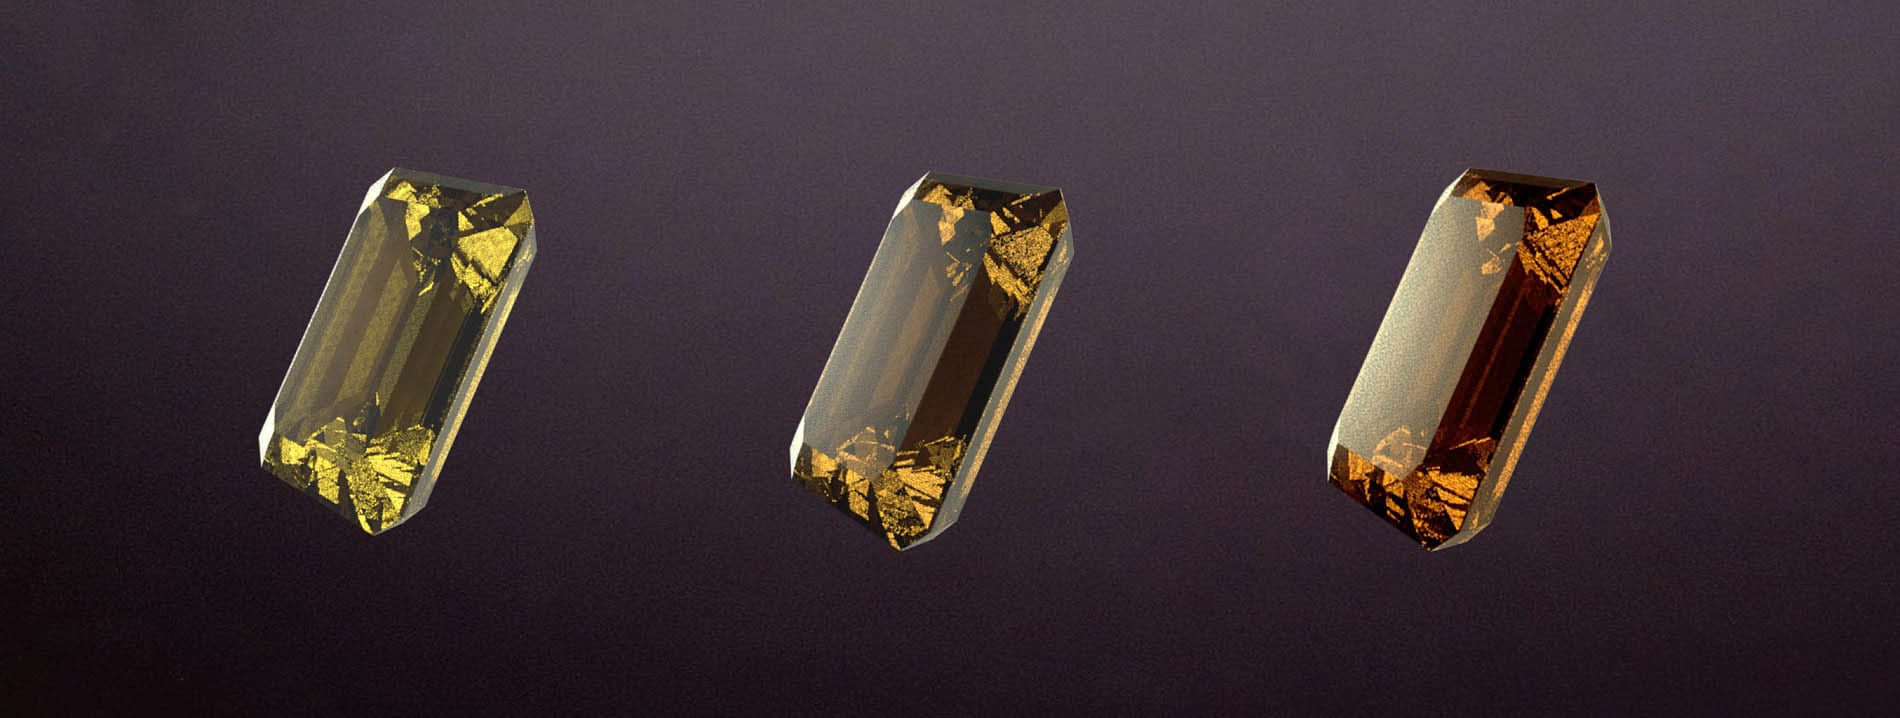 The origin colour of LONITÉ cremation diamond from ashes is amber yellow